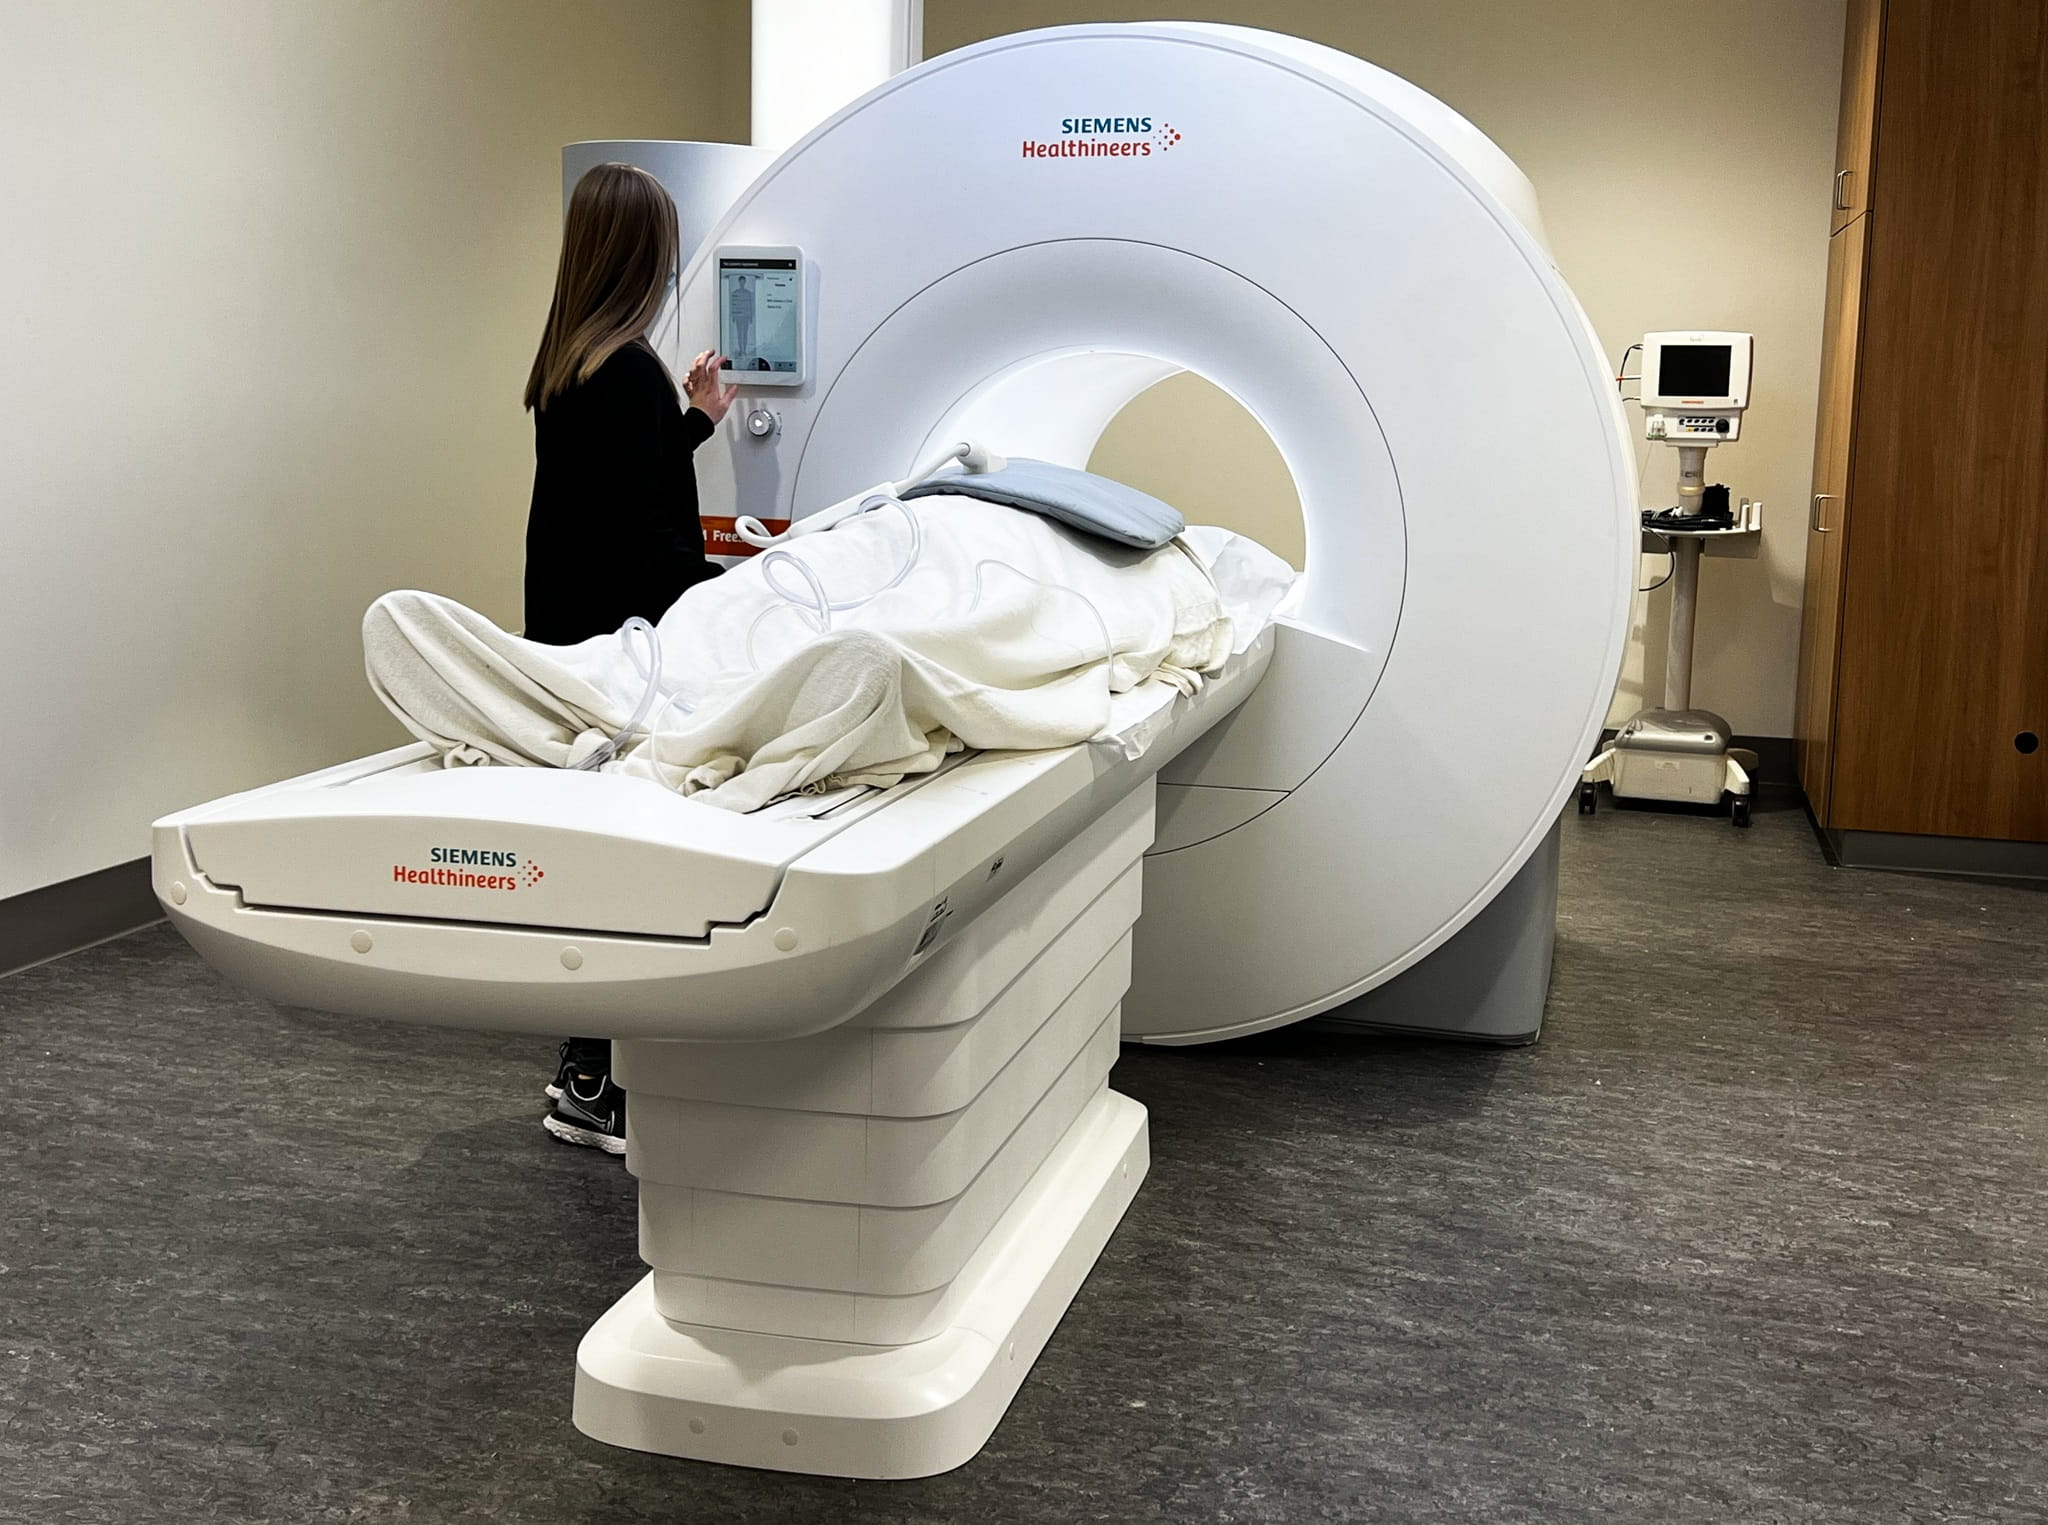 The Ohio State University Wexner Medical Center is the first in the nation to install a new FDA-approved MRI machine that has a lower magnetic field and a larger patient opening.